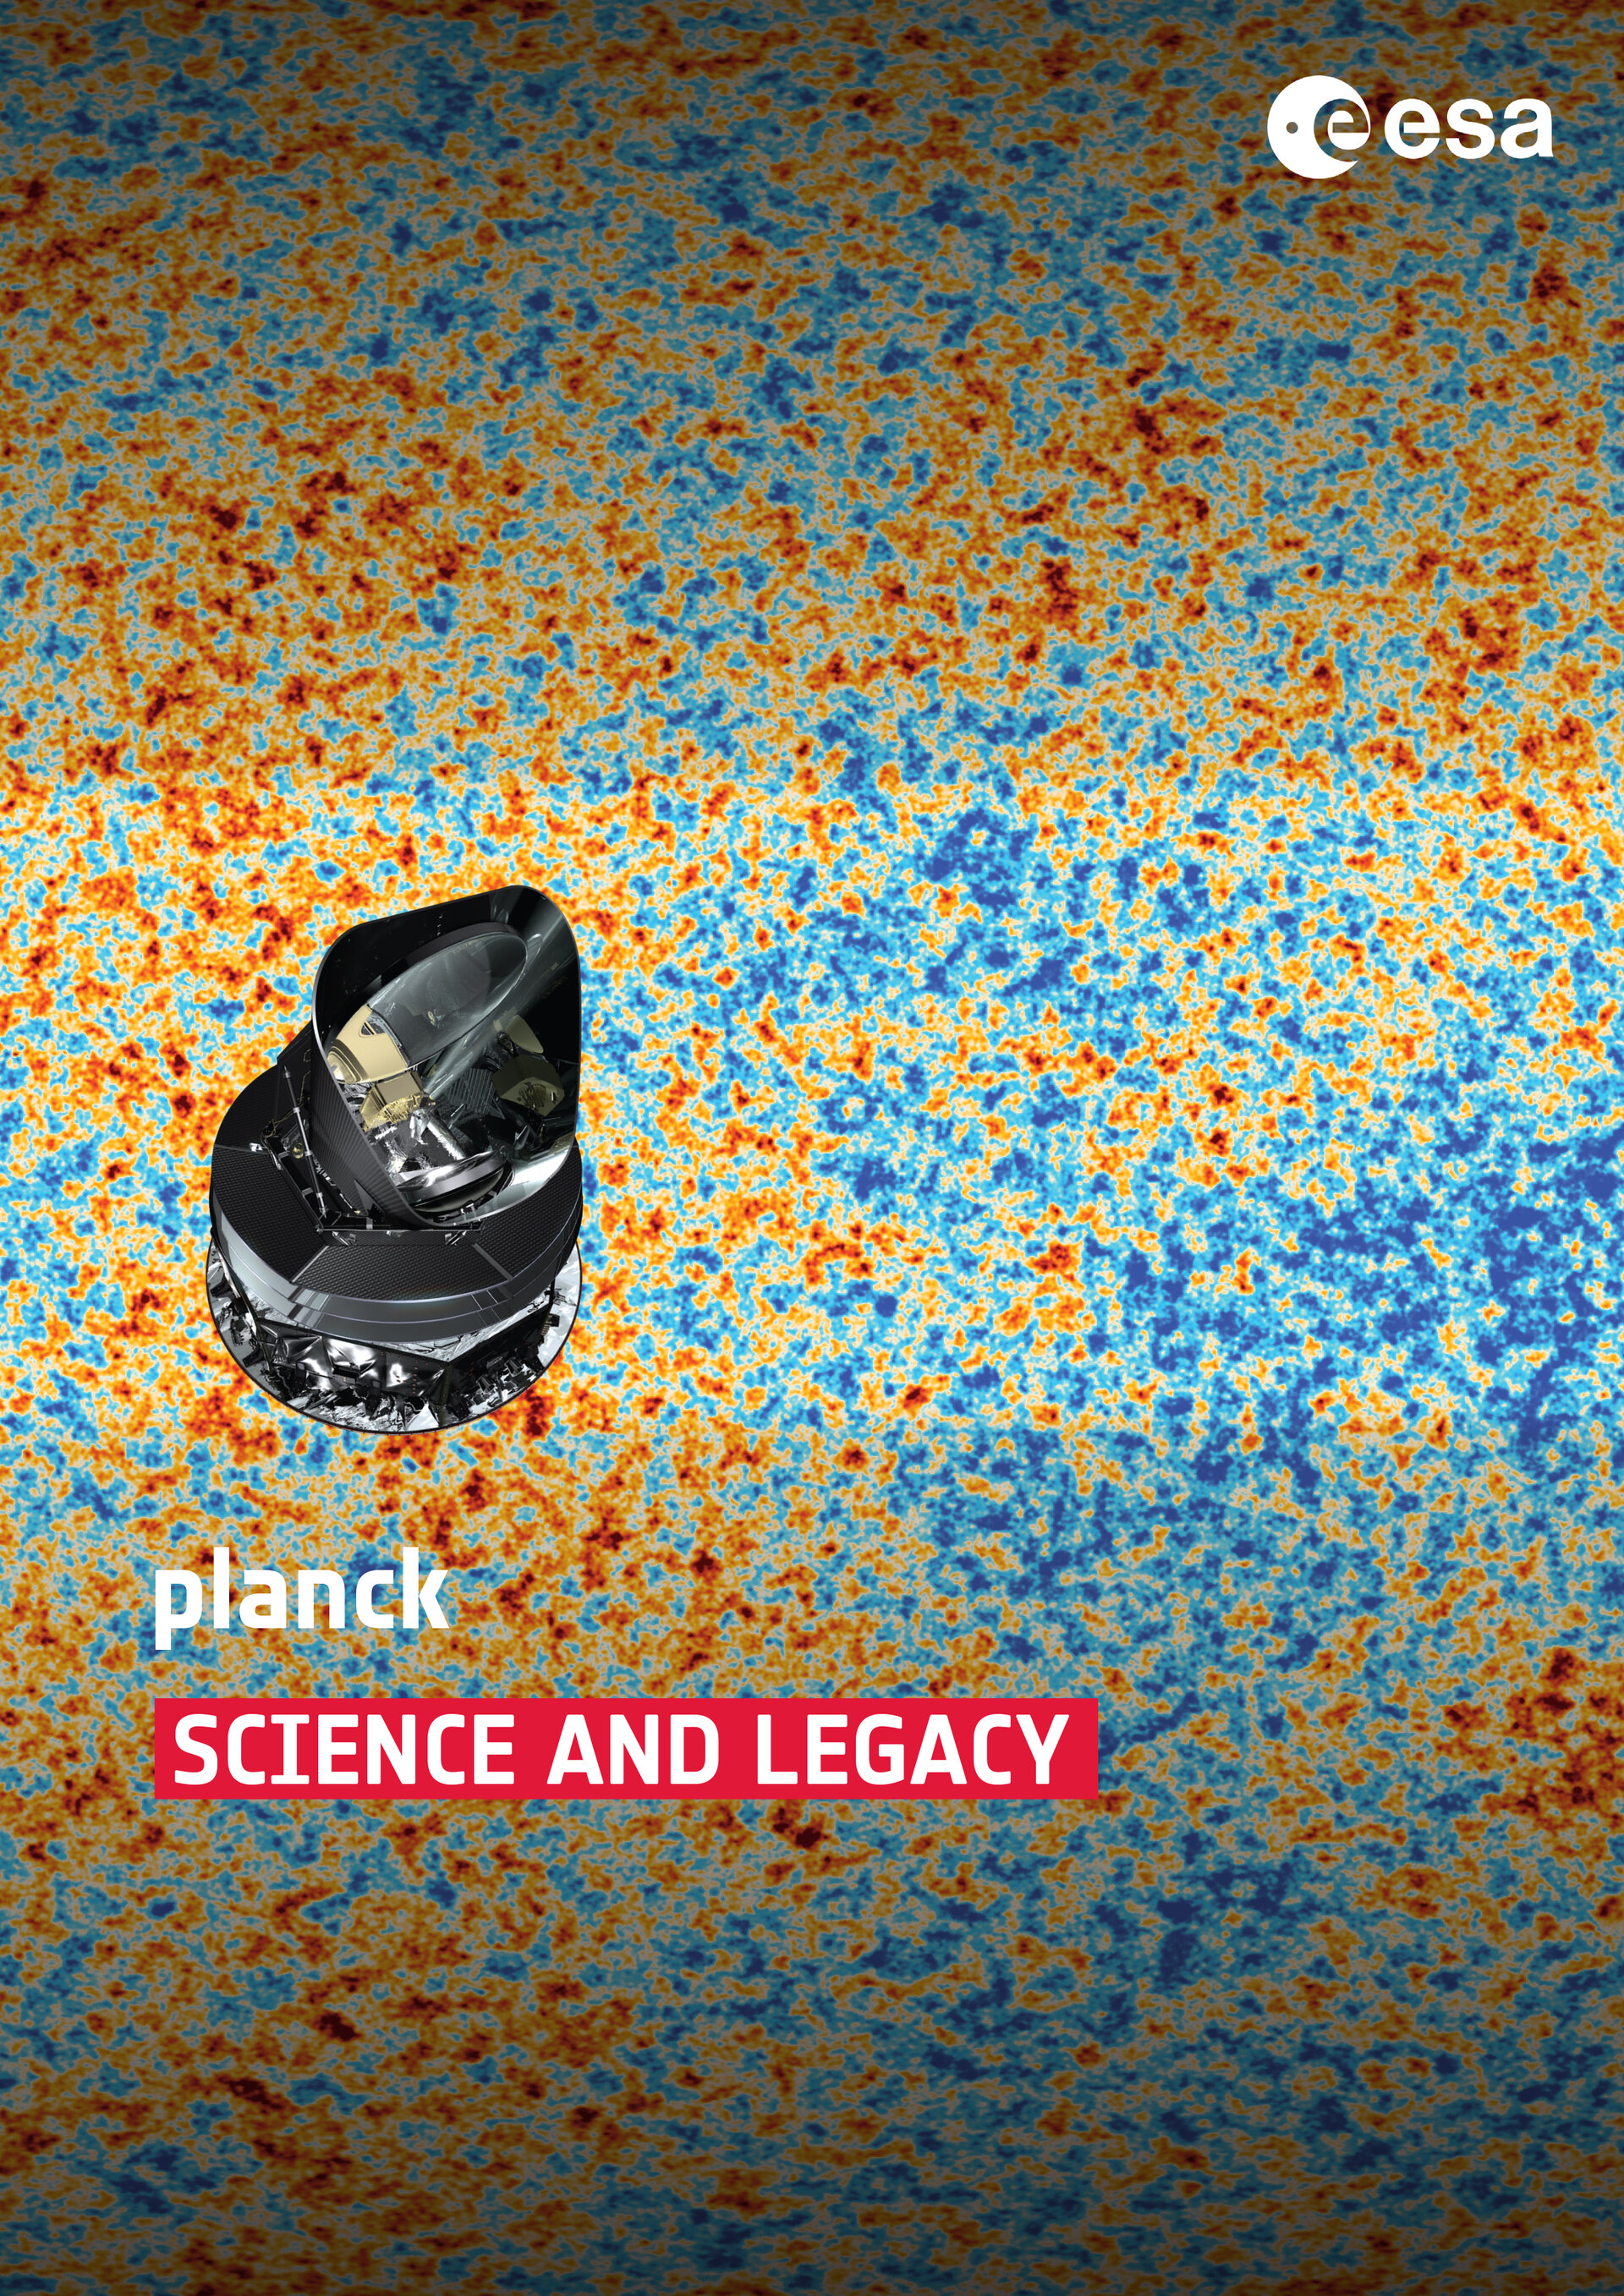 BR-347 Planck - Science and Legacy